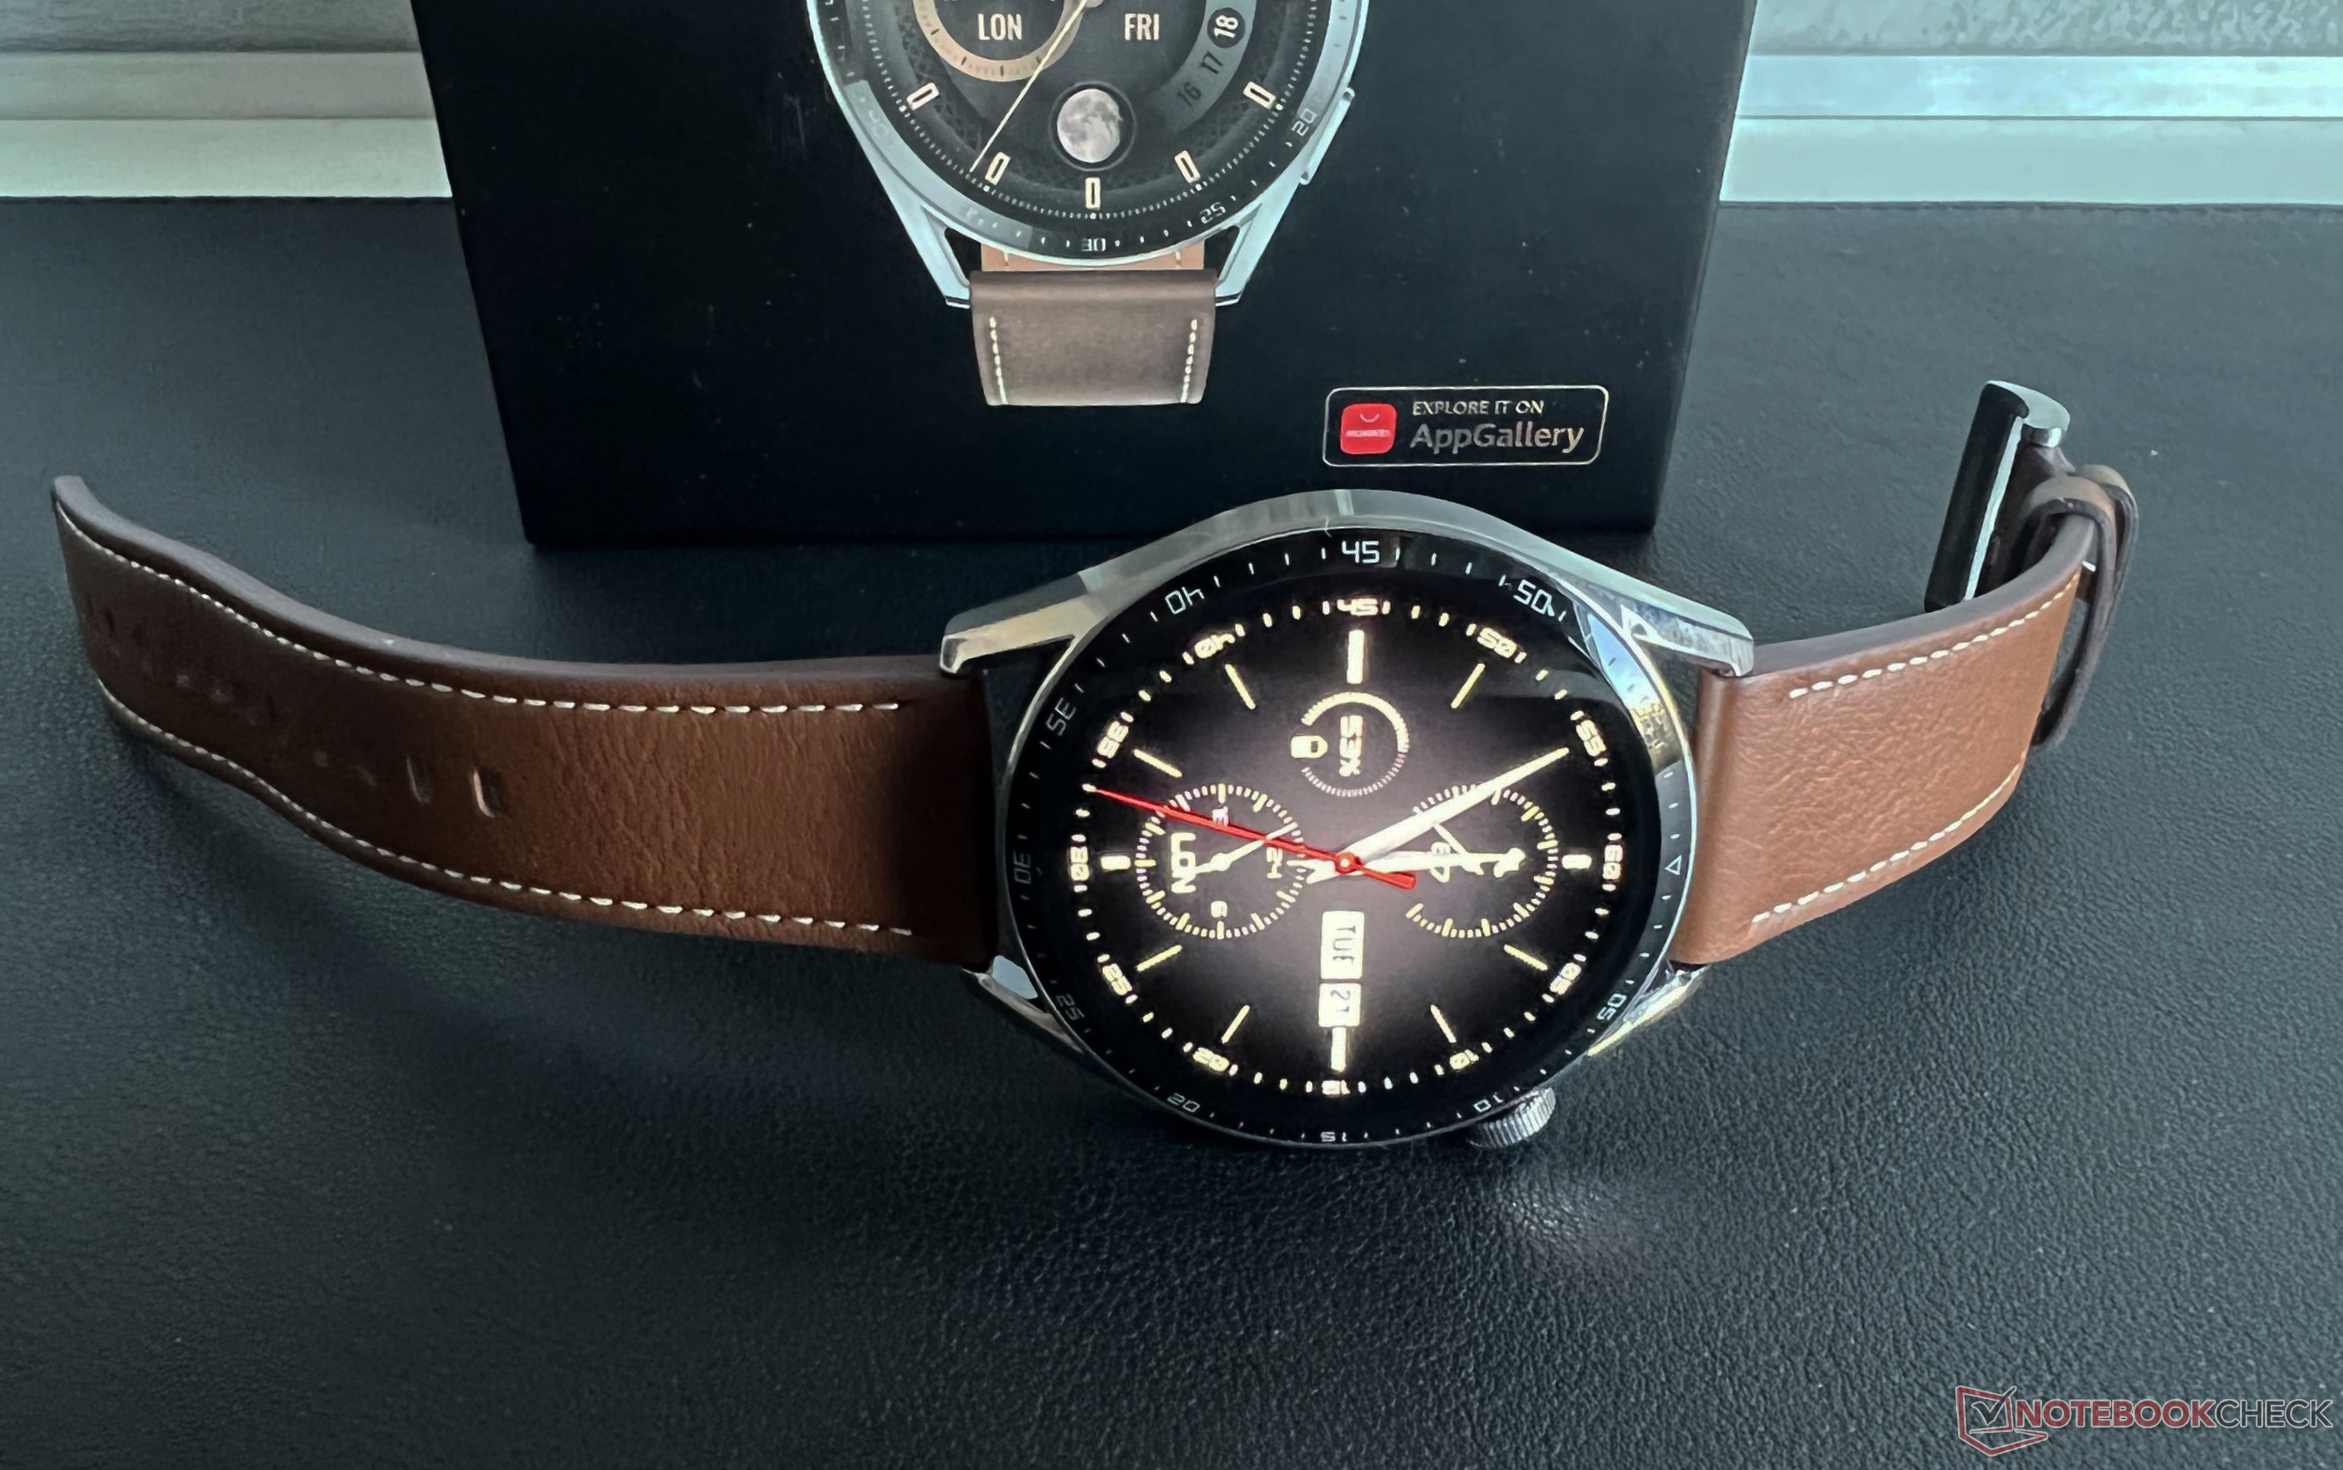 Huawei Watch GT 4: Successor to Watch GT 3 series on the horizon -   News